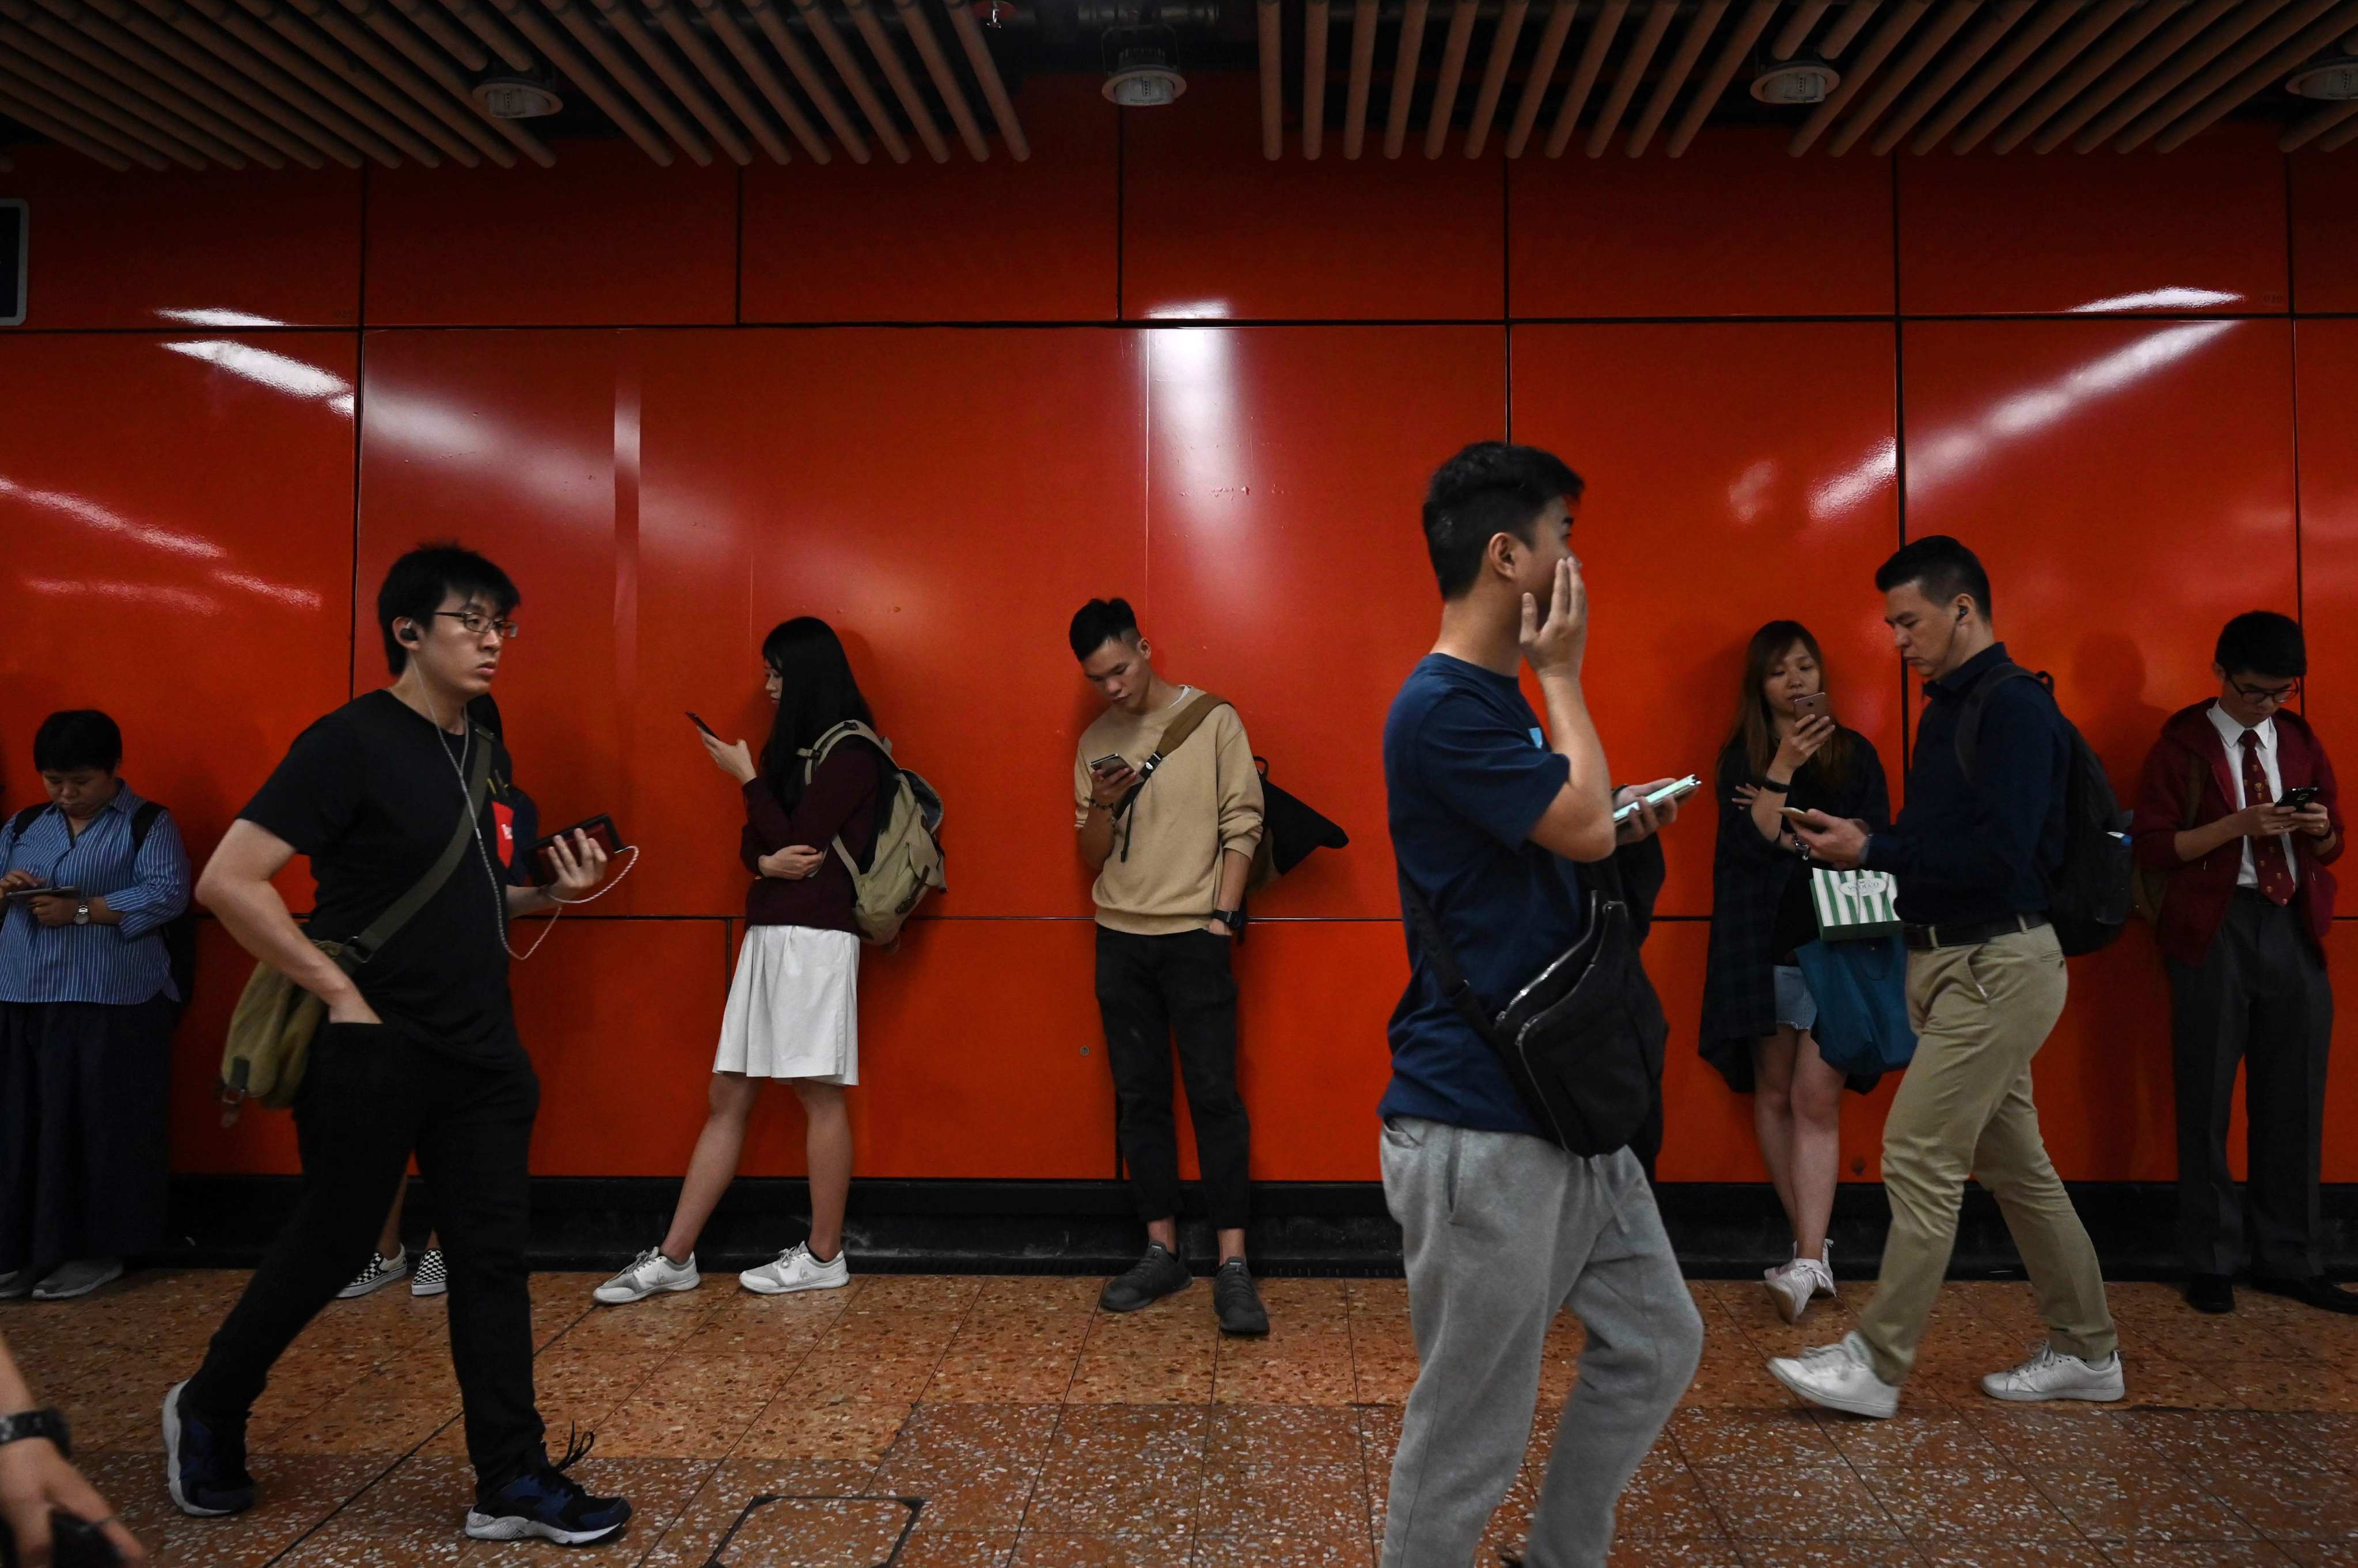 Commuters use their mobile phones as they stand in an MTR train station in Hong Kong’s Kowloon district in December 2018. Emotive social feeds are good for advertising businesses, but destructive to mental health and social cohesion. Photo: AFP 